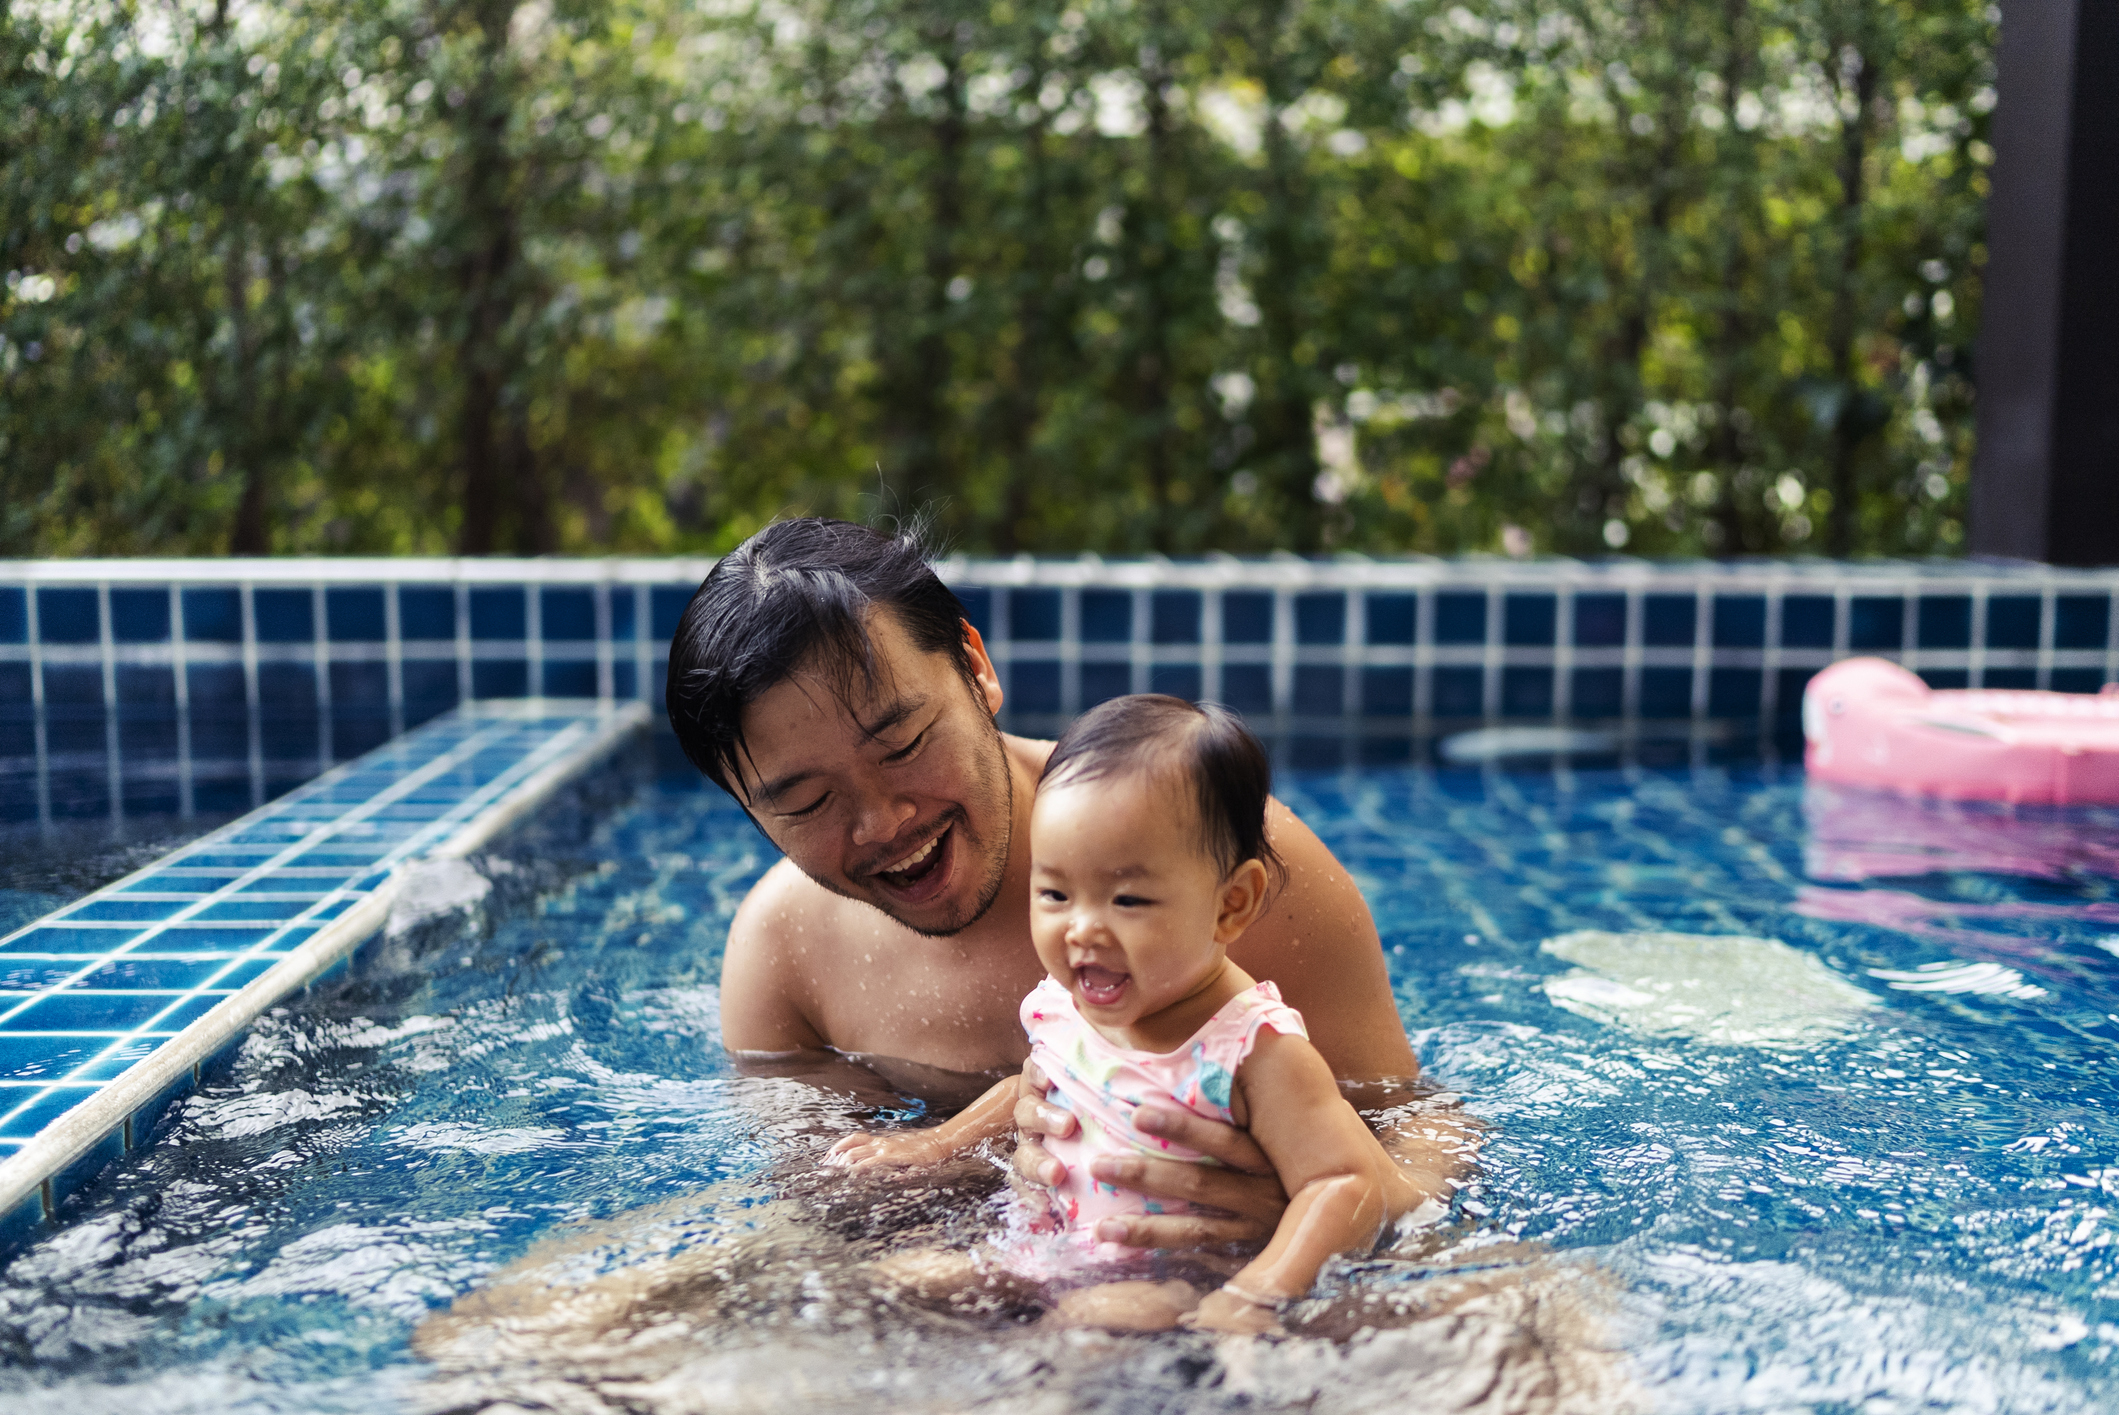 A father and daughter are swimming in a pool